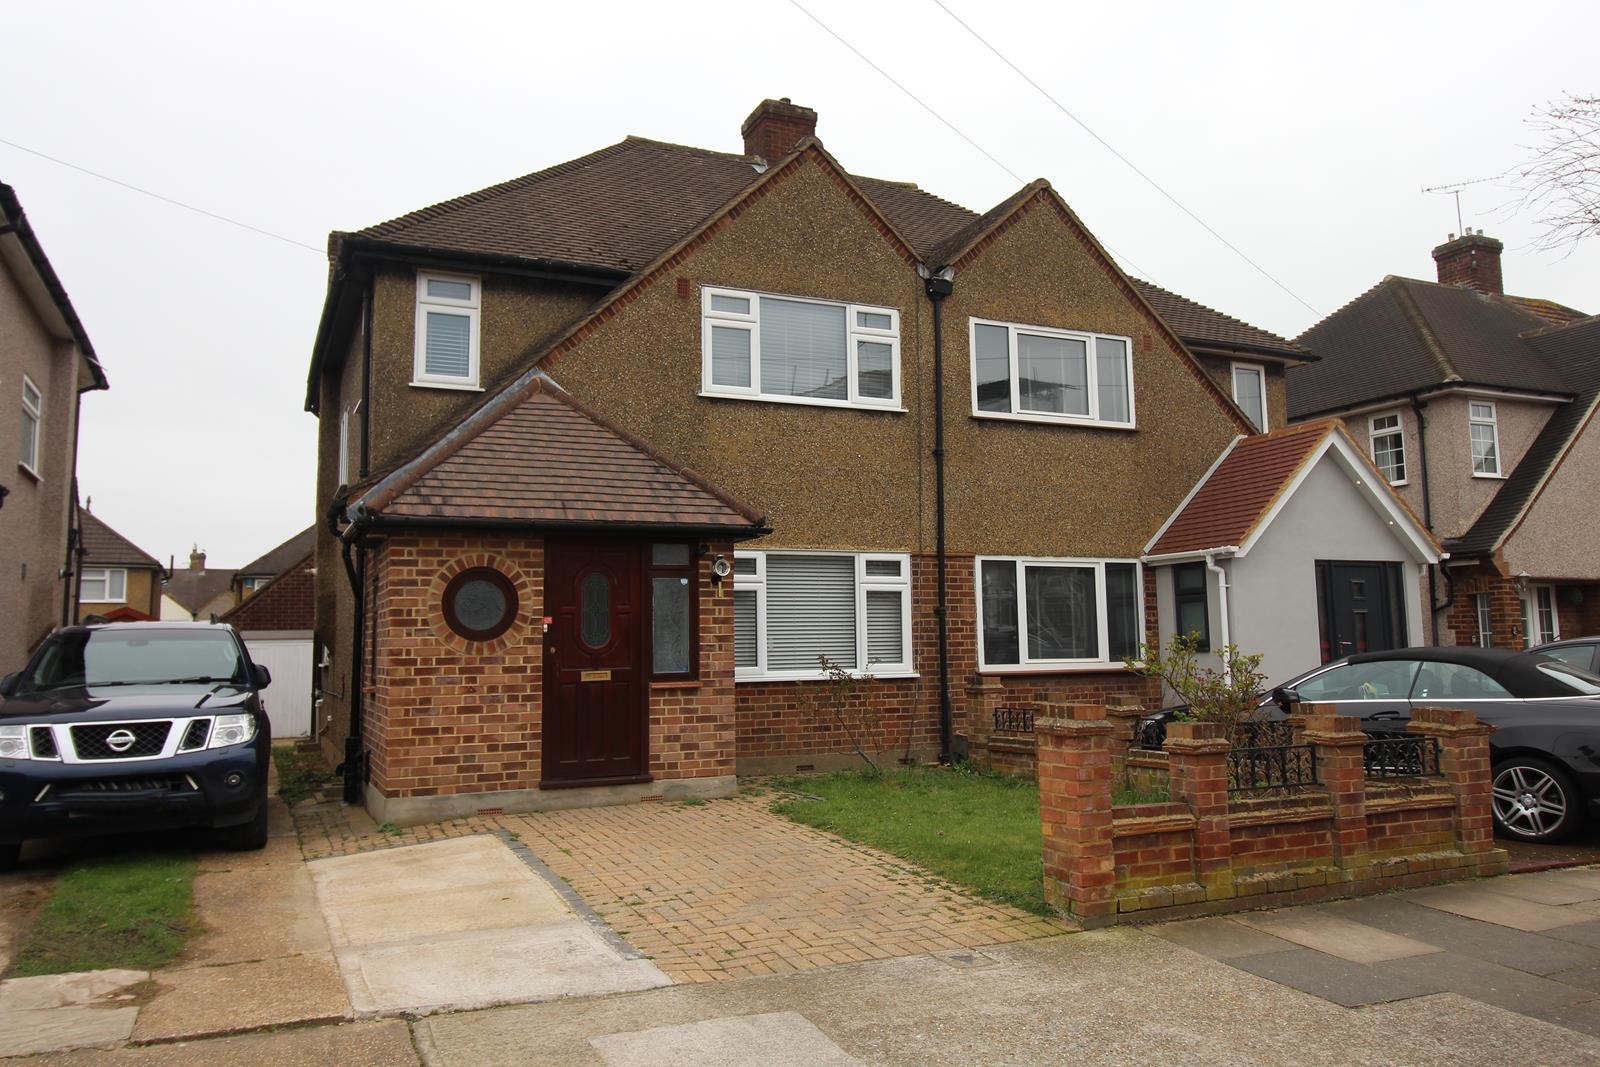 Humber Drive, Upminster, Essex, RM14